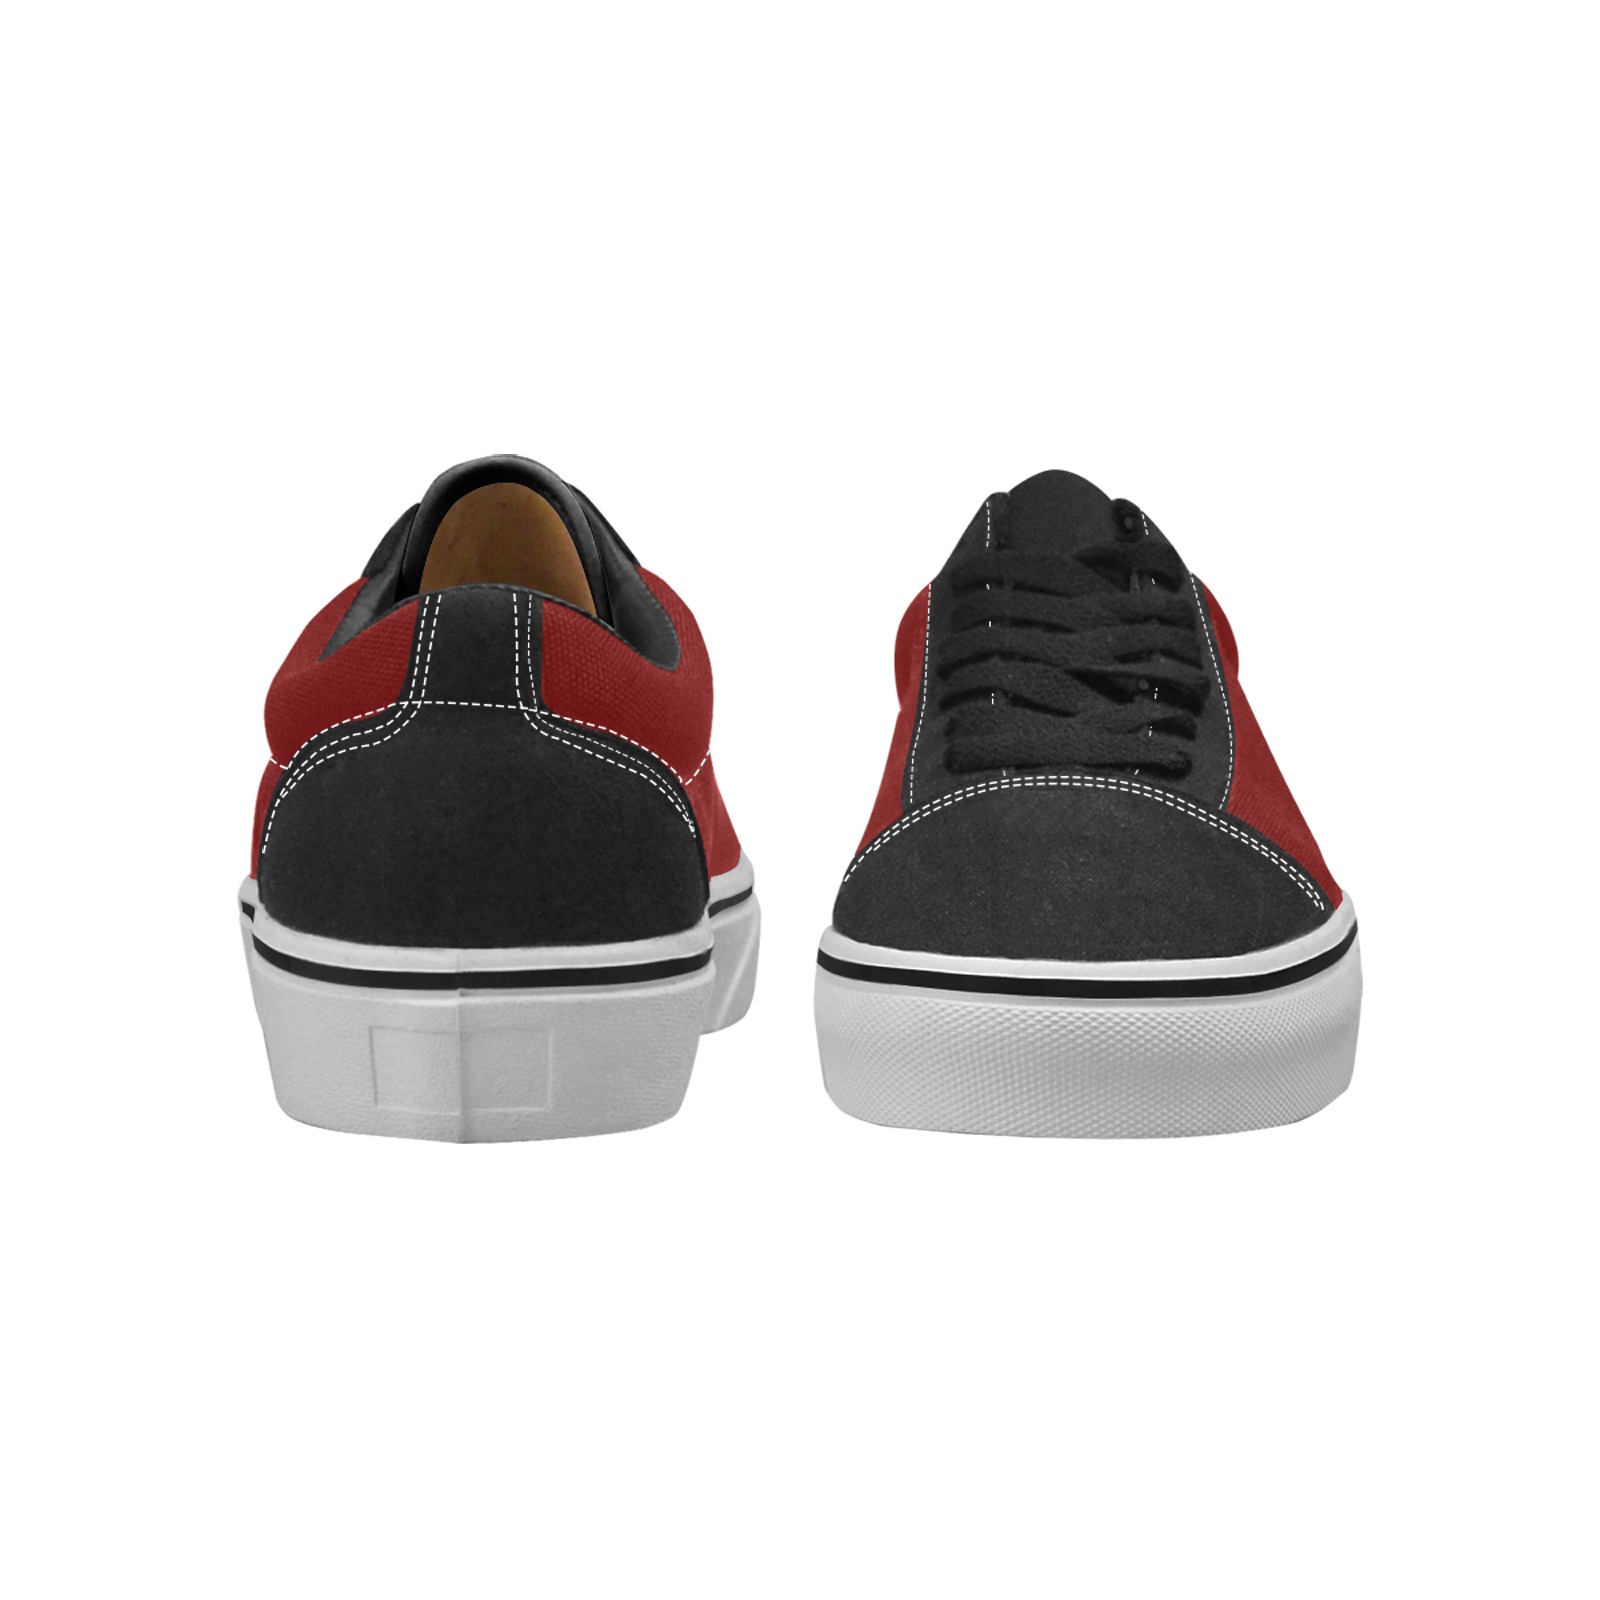 color blood red Women's Low Top Skateboarding Shoes (Model E001-2)